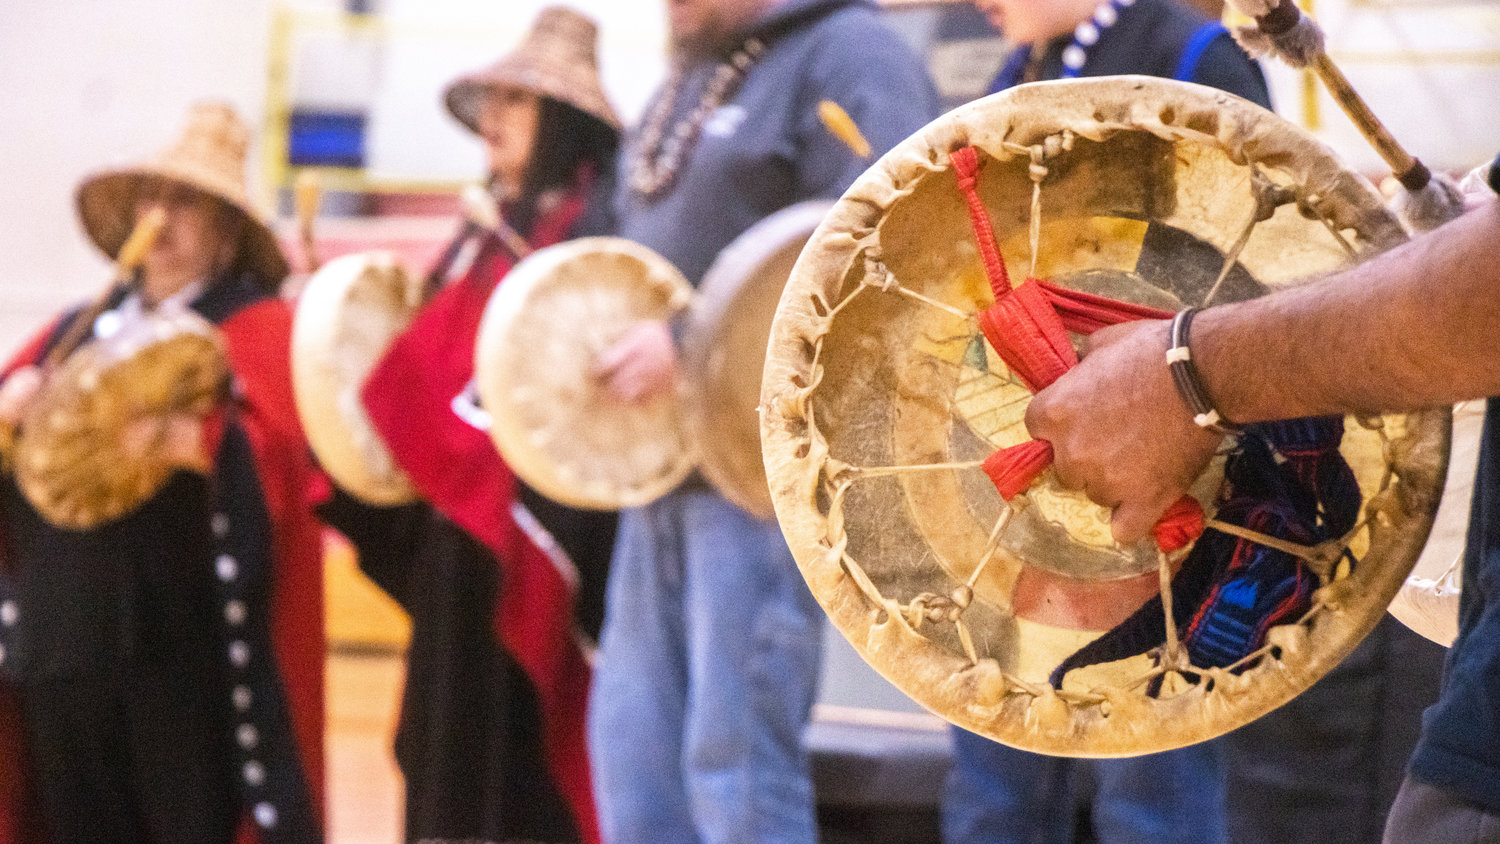 Drums are played by members of the Cowlitz Tribe during a ceremony at Toledo High School inside George Murdock Gymnasium on Friday.